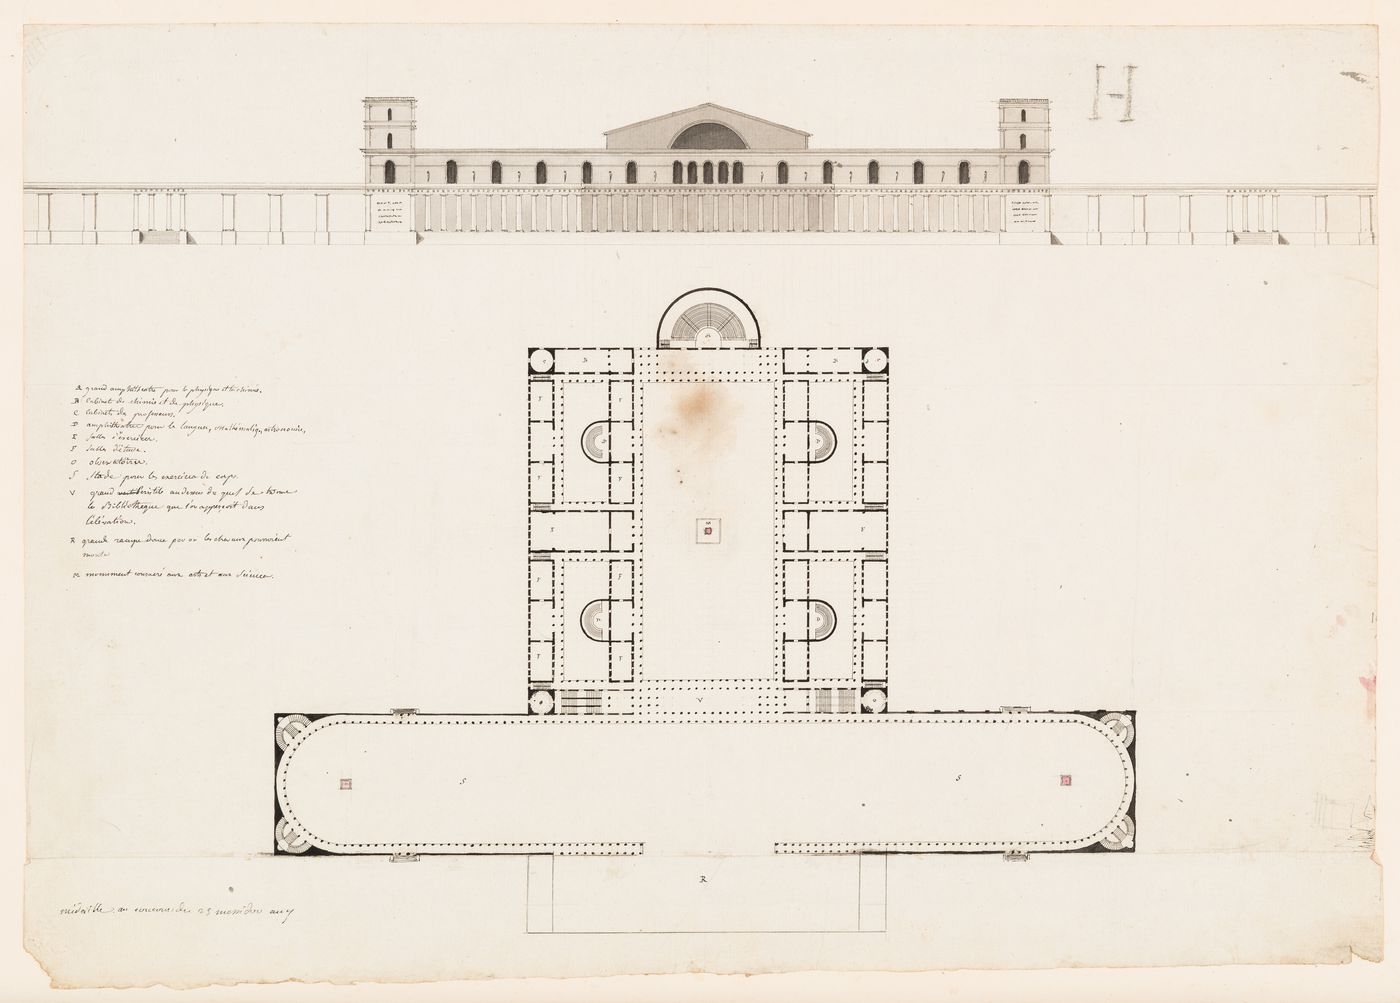 Plan and elevation for a market; verso: Concours d'émulation, June 1801: Plan and elevation for a school or college